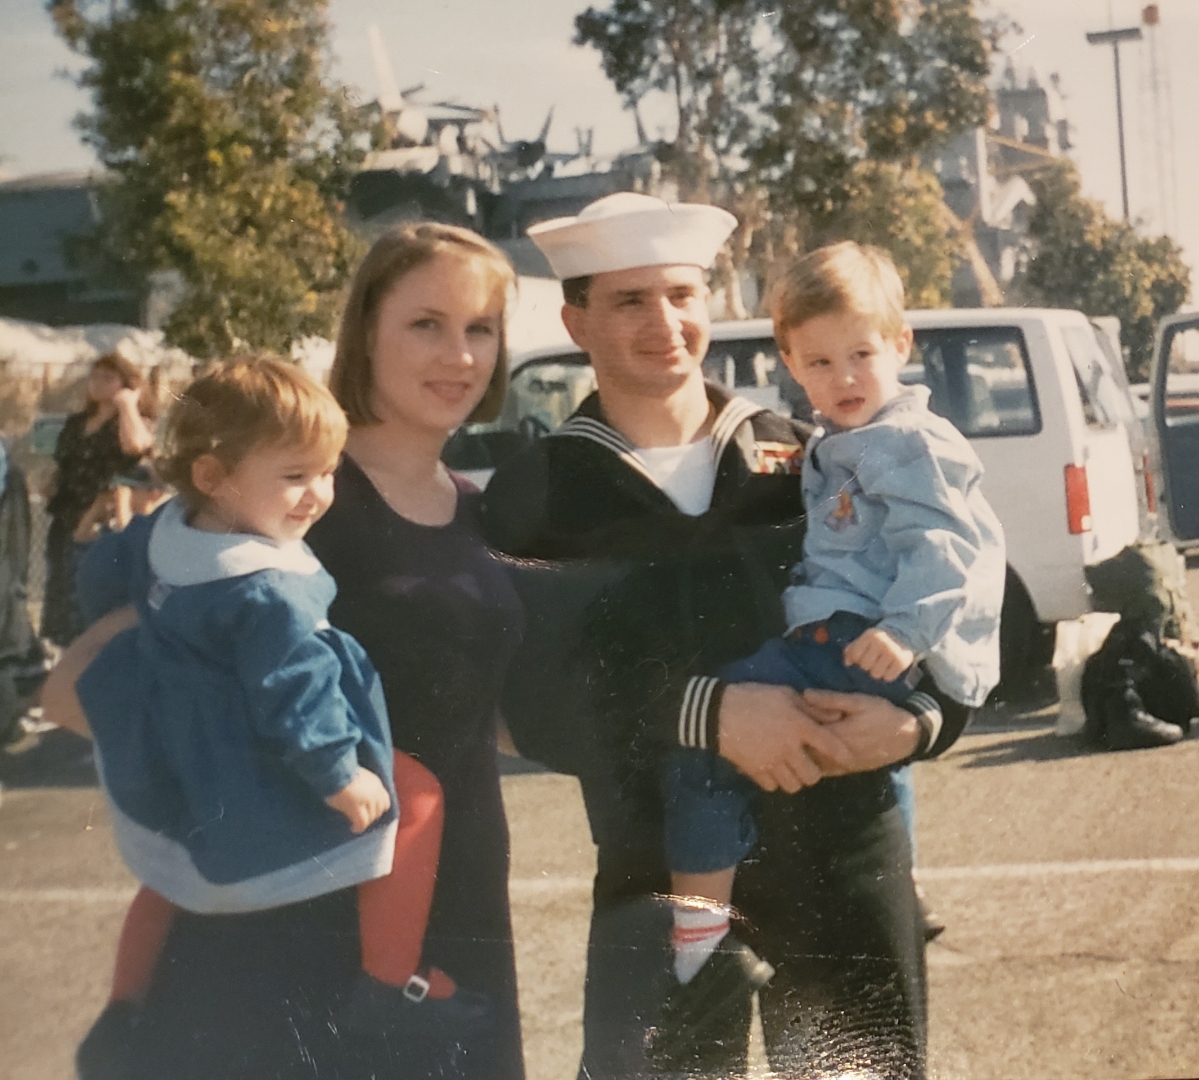 Left on the Dock: Veteran’s Day links generations in this family